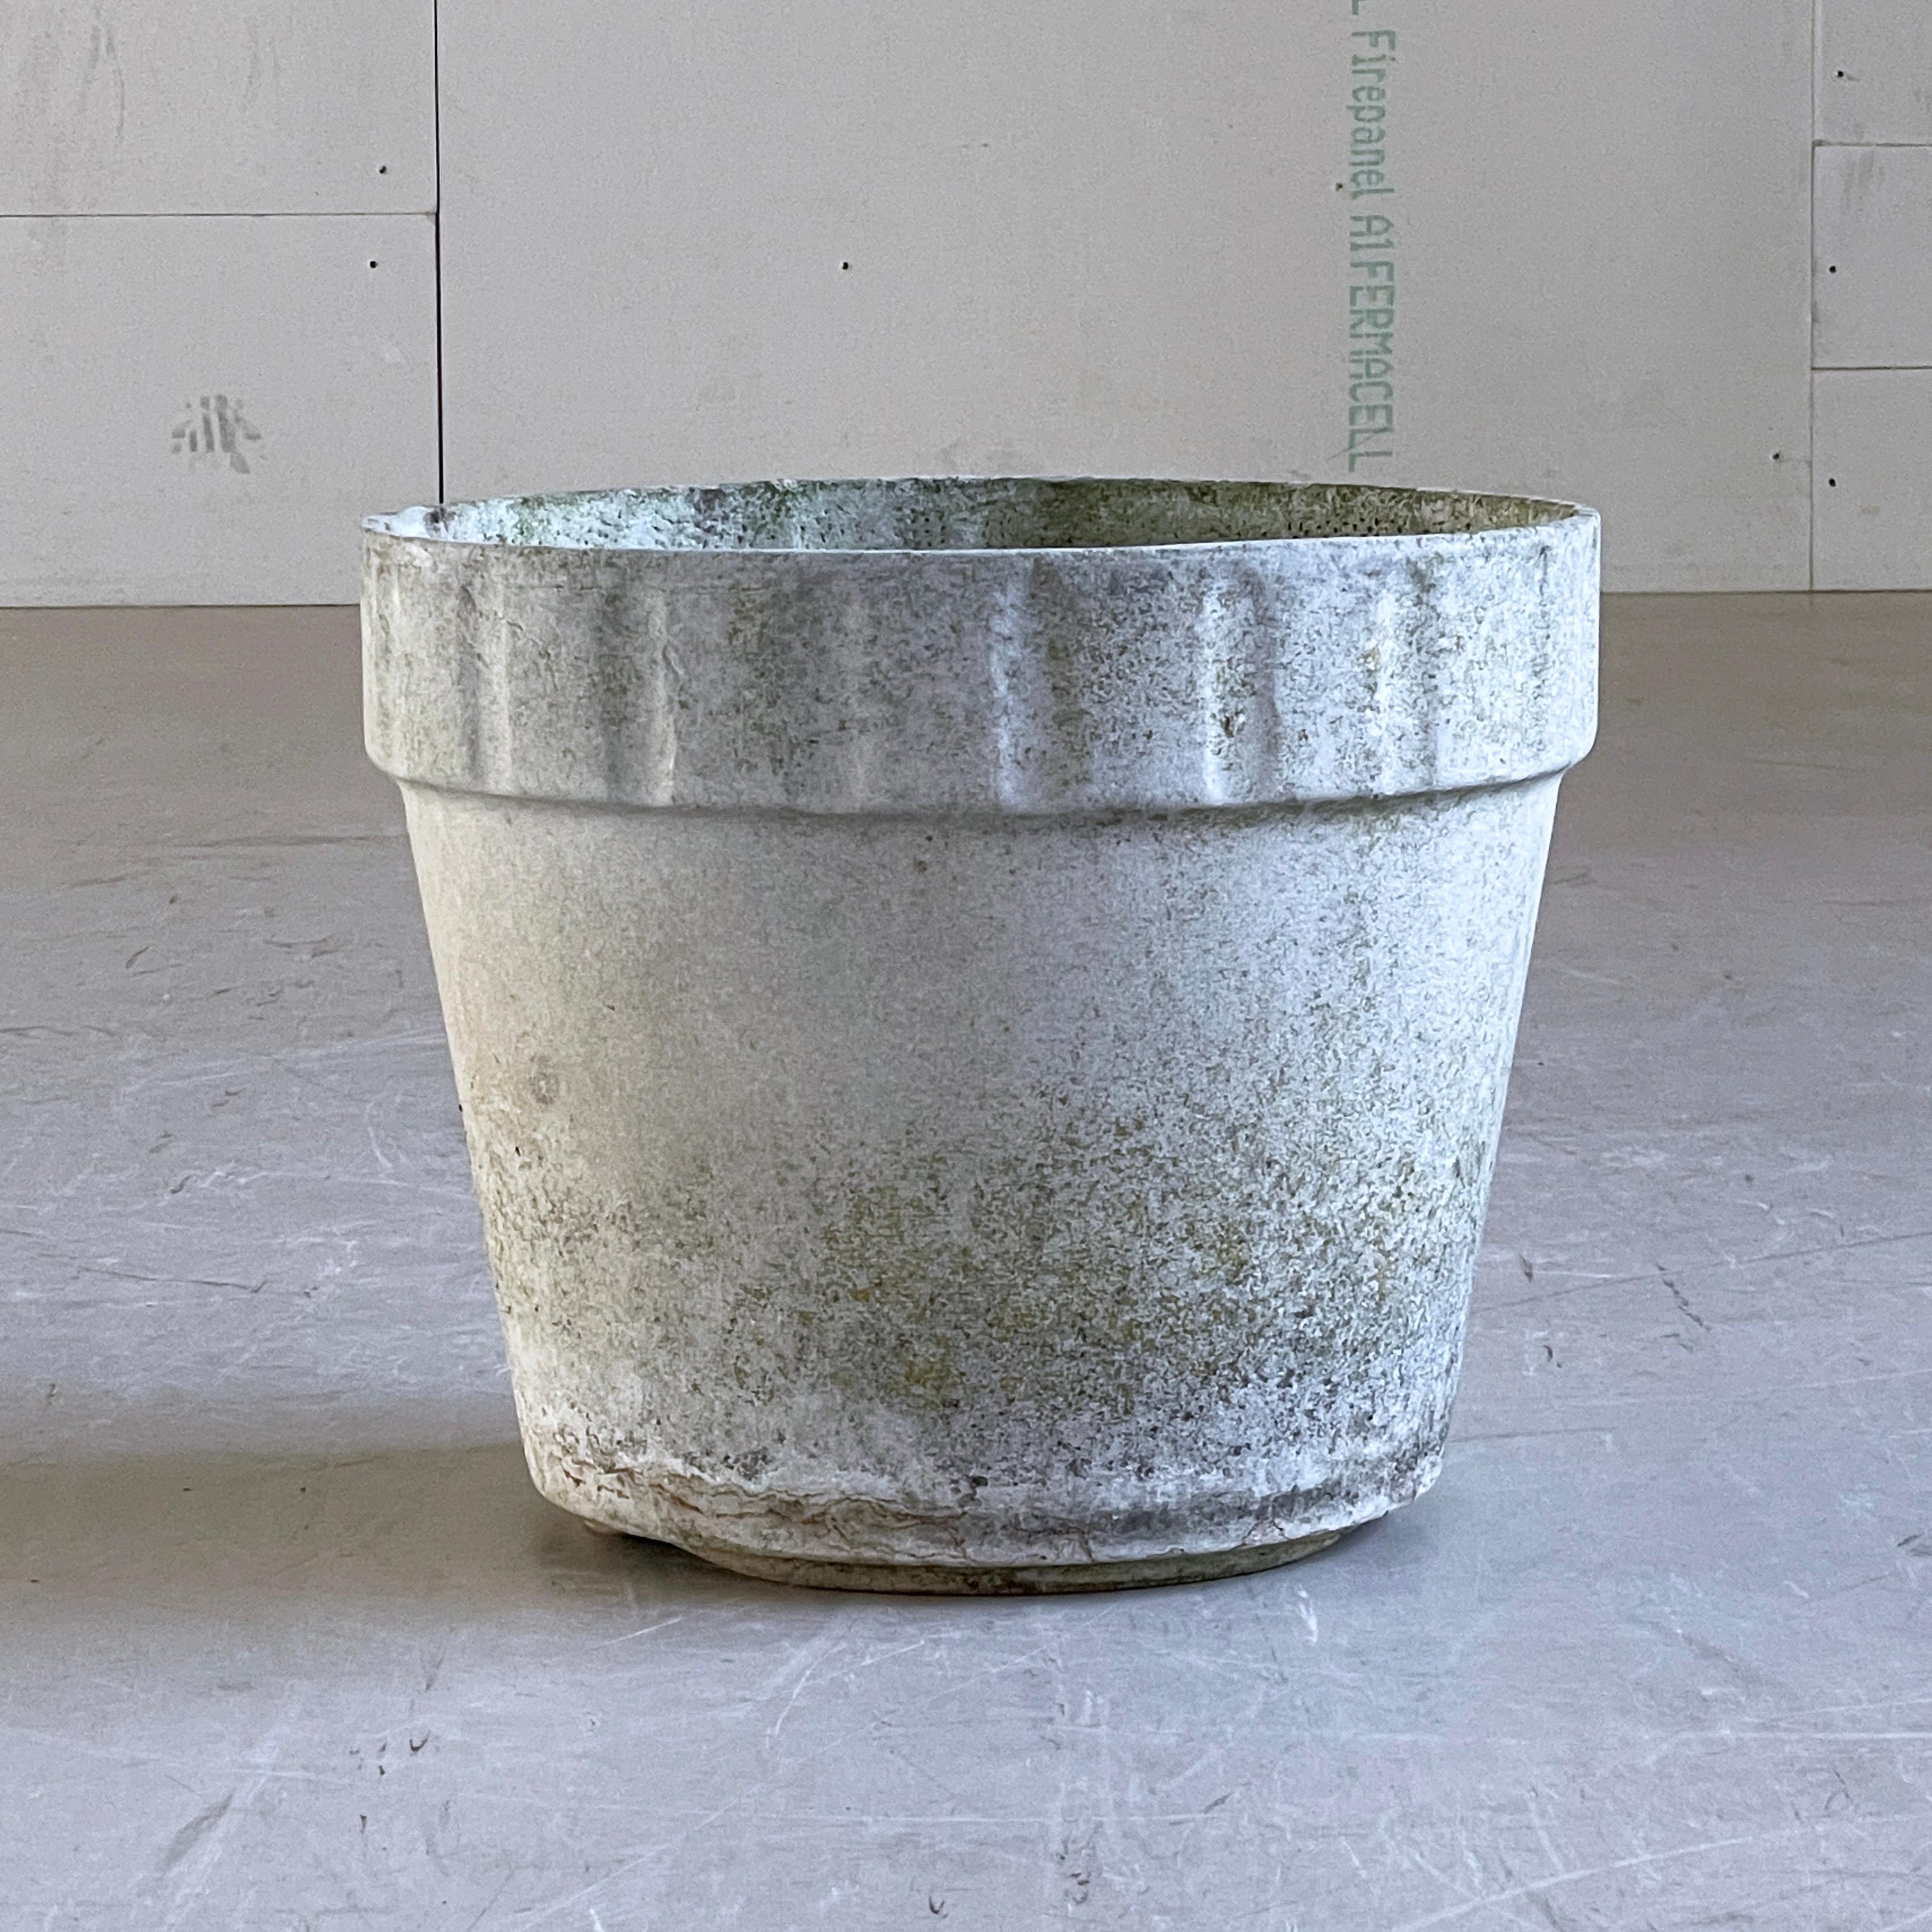 Monumental concrete flower pot by Swiss designer, Willy Guhl. Solid concrete made in Switzerland 1960 - 1970. Produced by Eternit AG.  
Tapered structure with a ribbed upper section with drainage holes. In original condition with beautiful